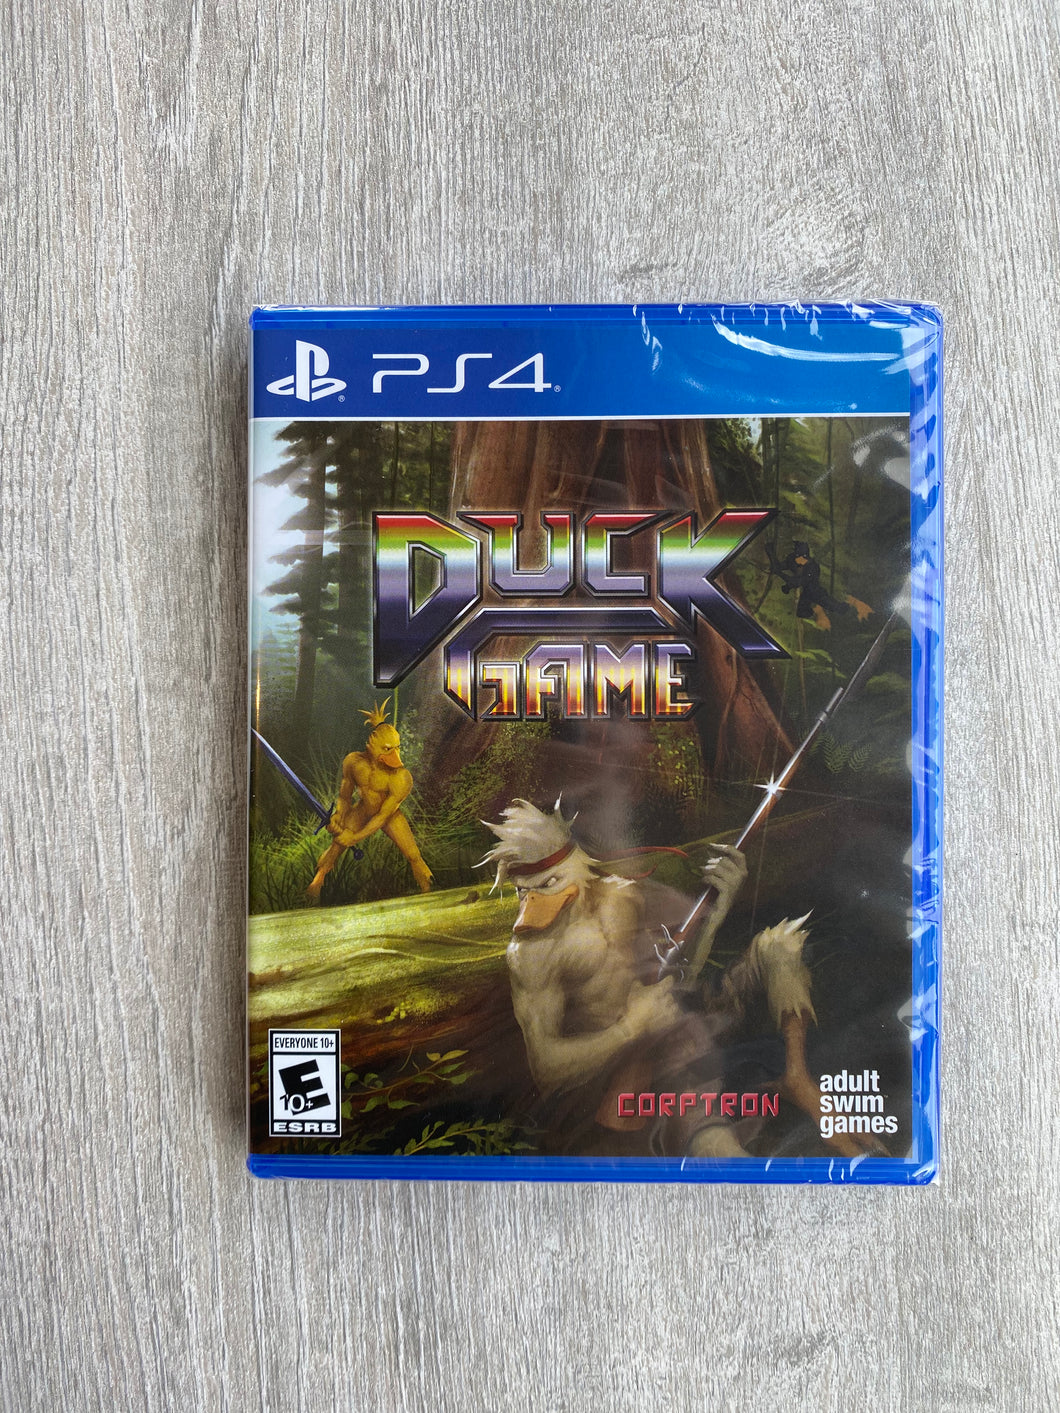 Duck game / Limited run games / PS4